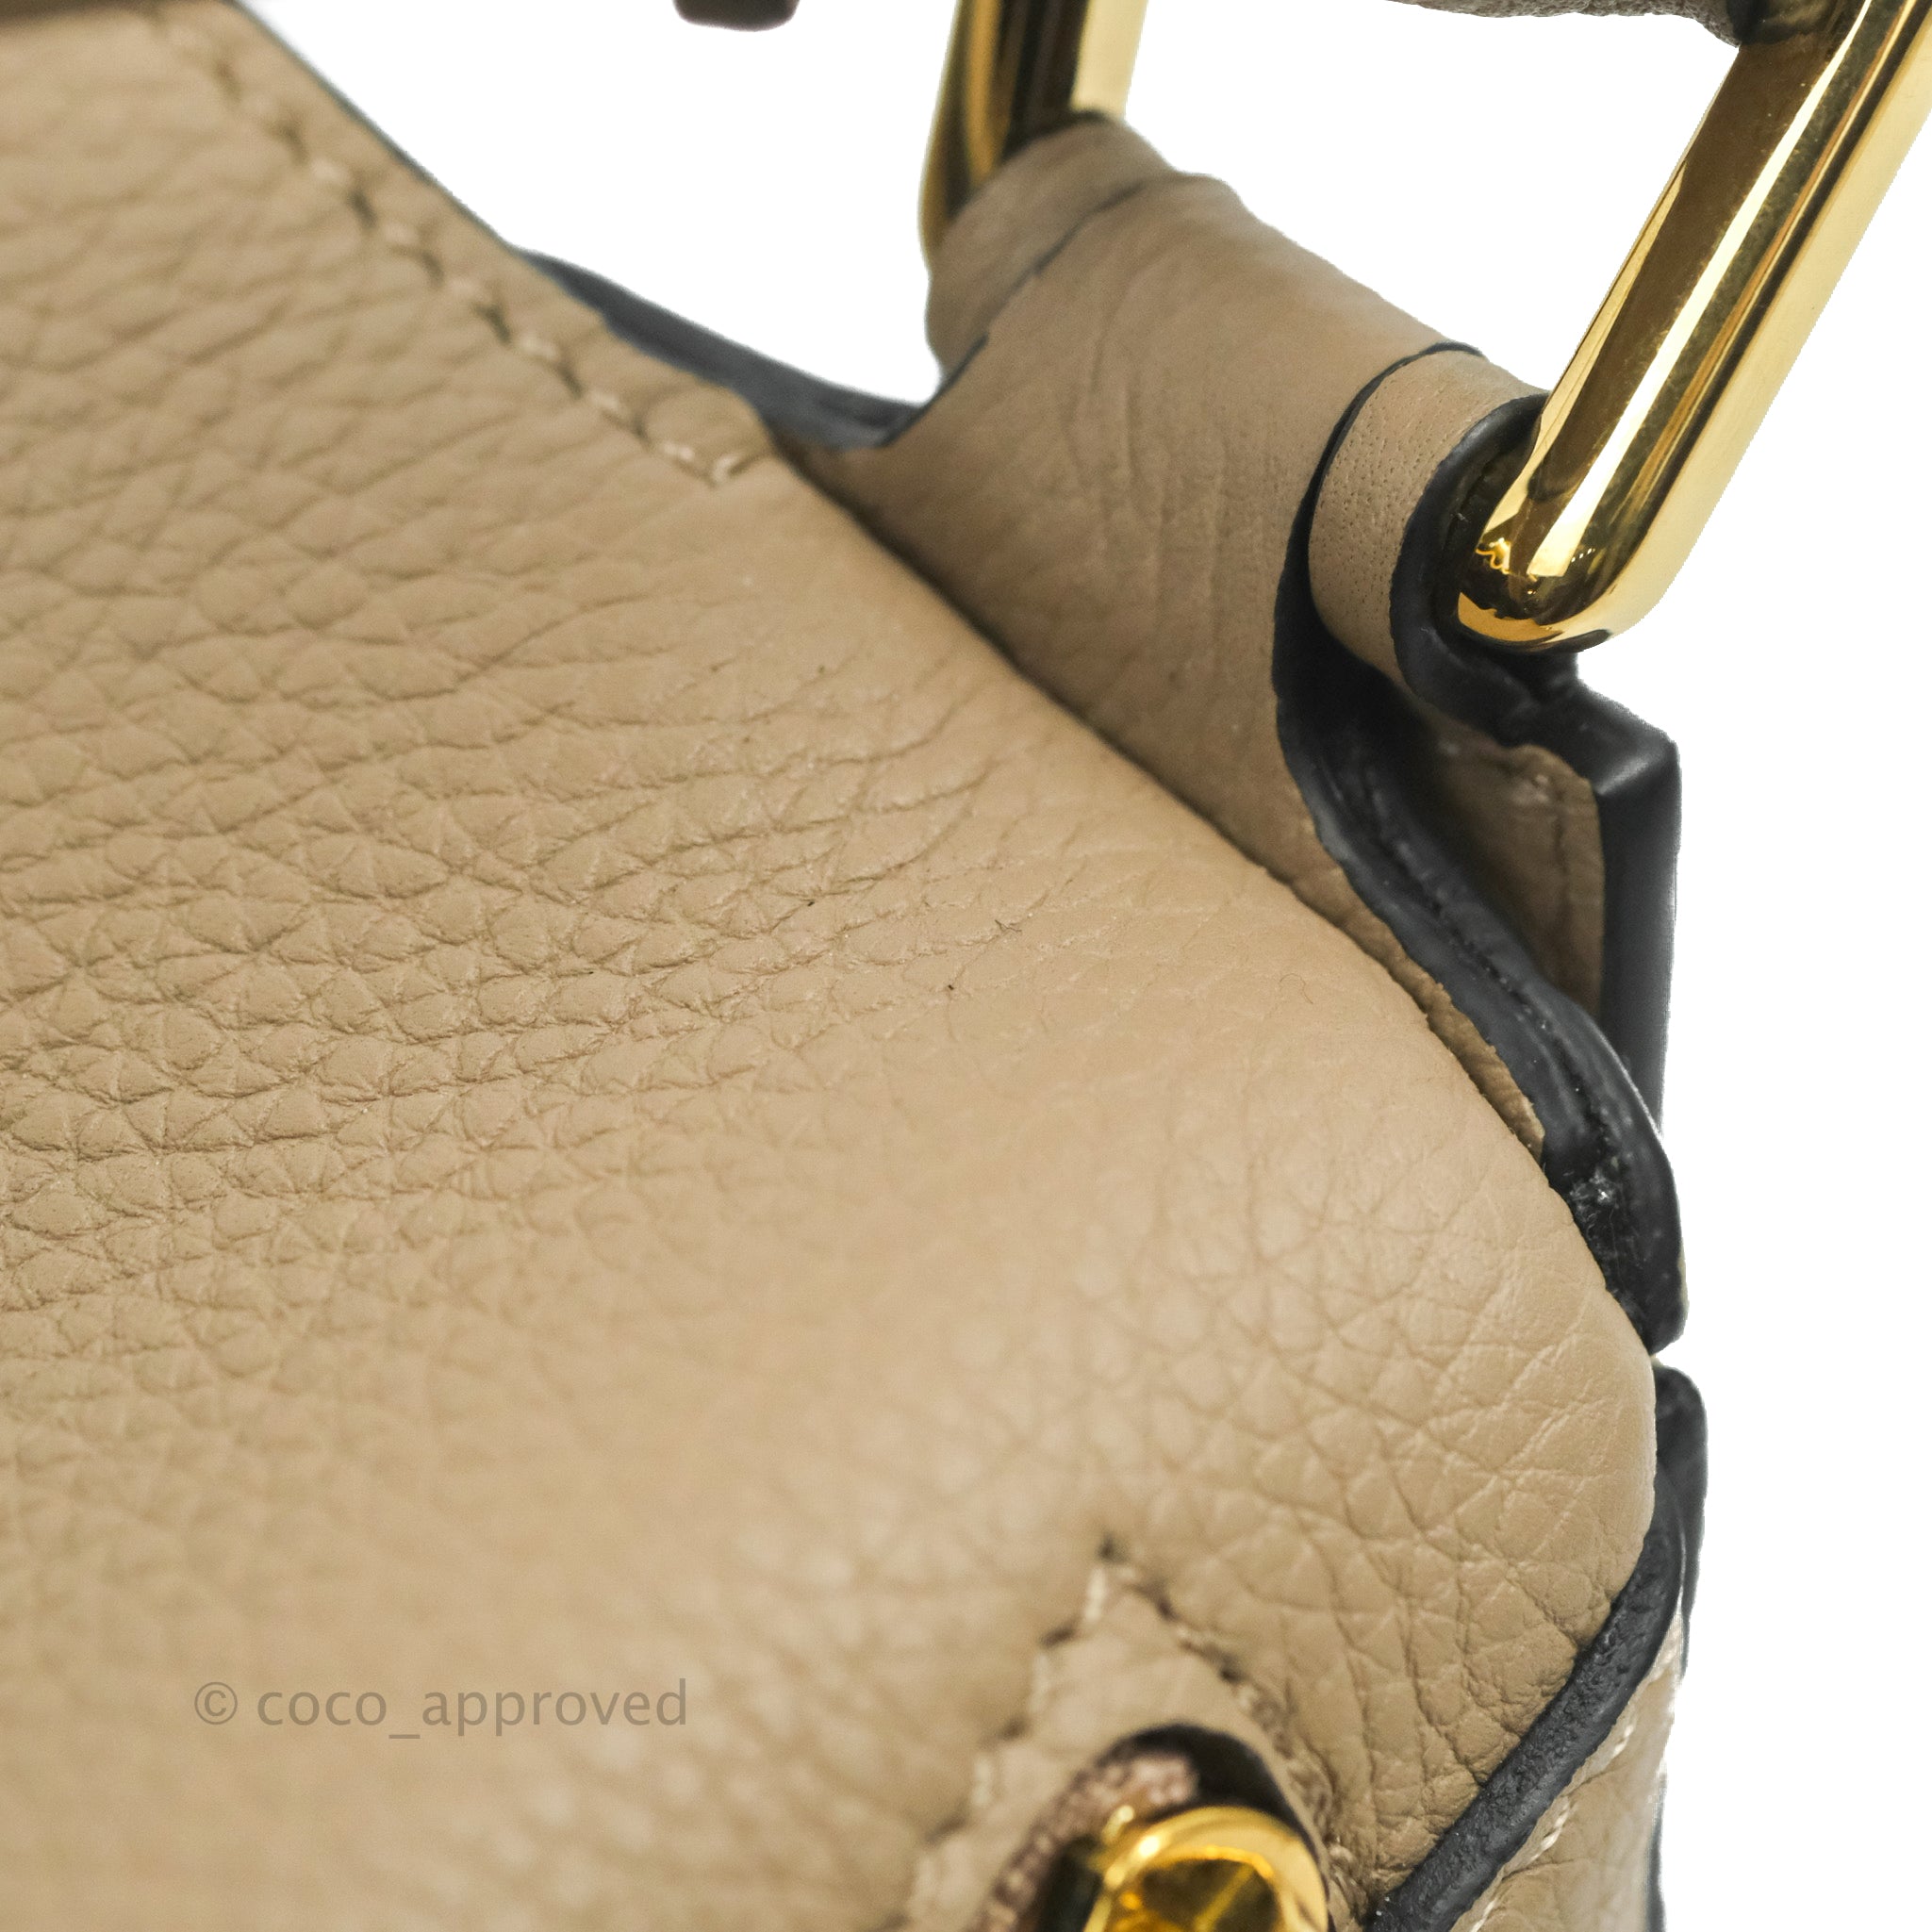 Loewe Small Puzzle Bag Sand Mink Grained Calfskin – Coco Approved Studio